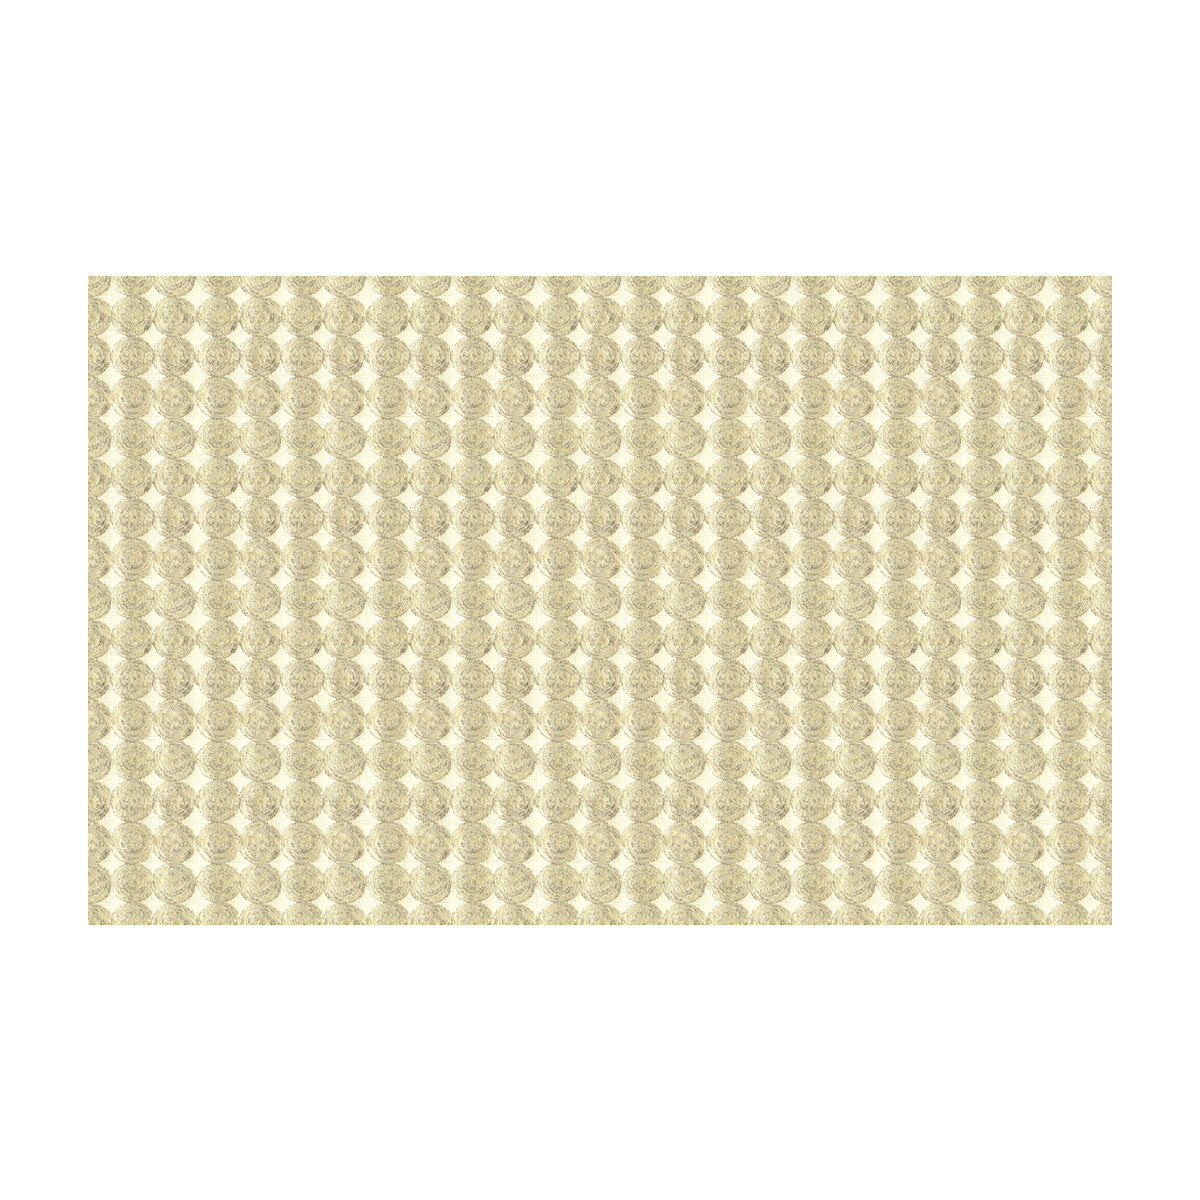 Rare Coin fabric in silver gold color - pattern 33557.411.0 - by Kravet Couture in the Modern Luxe collection